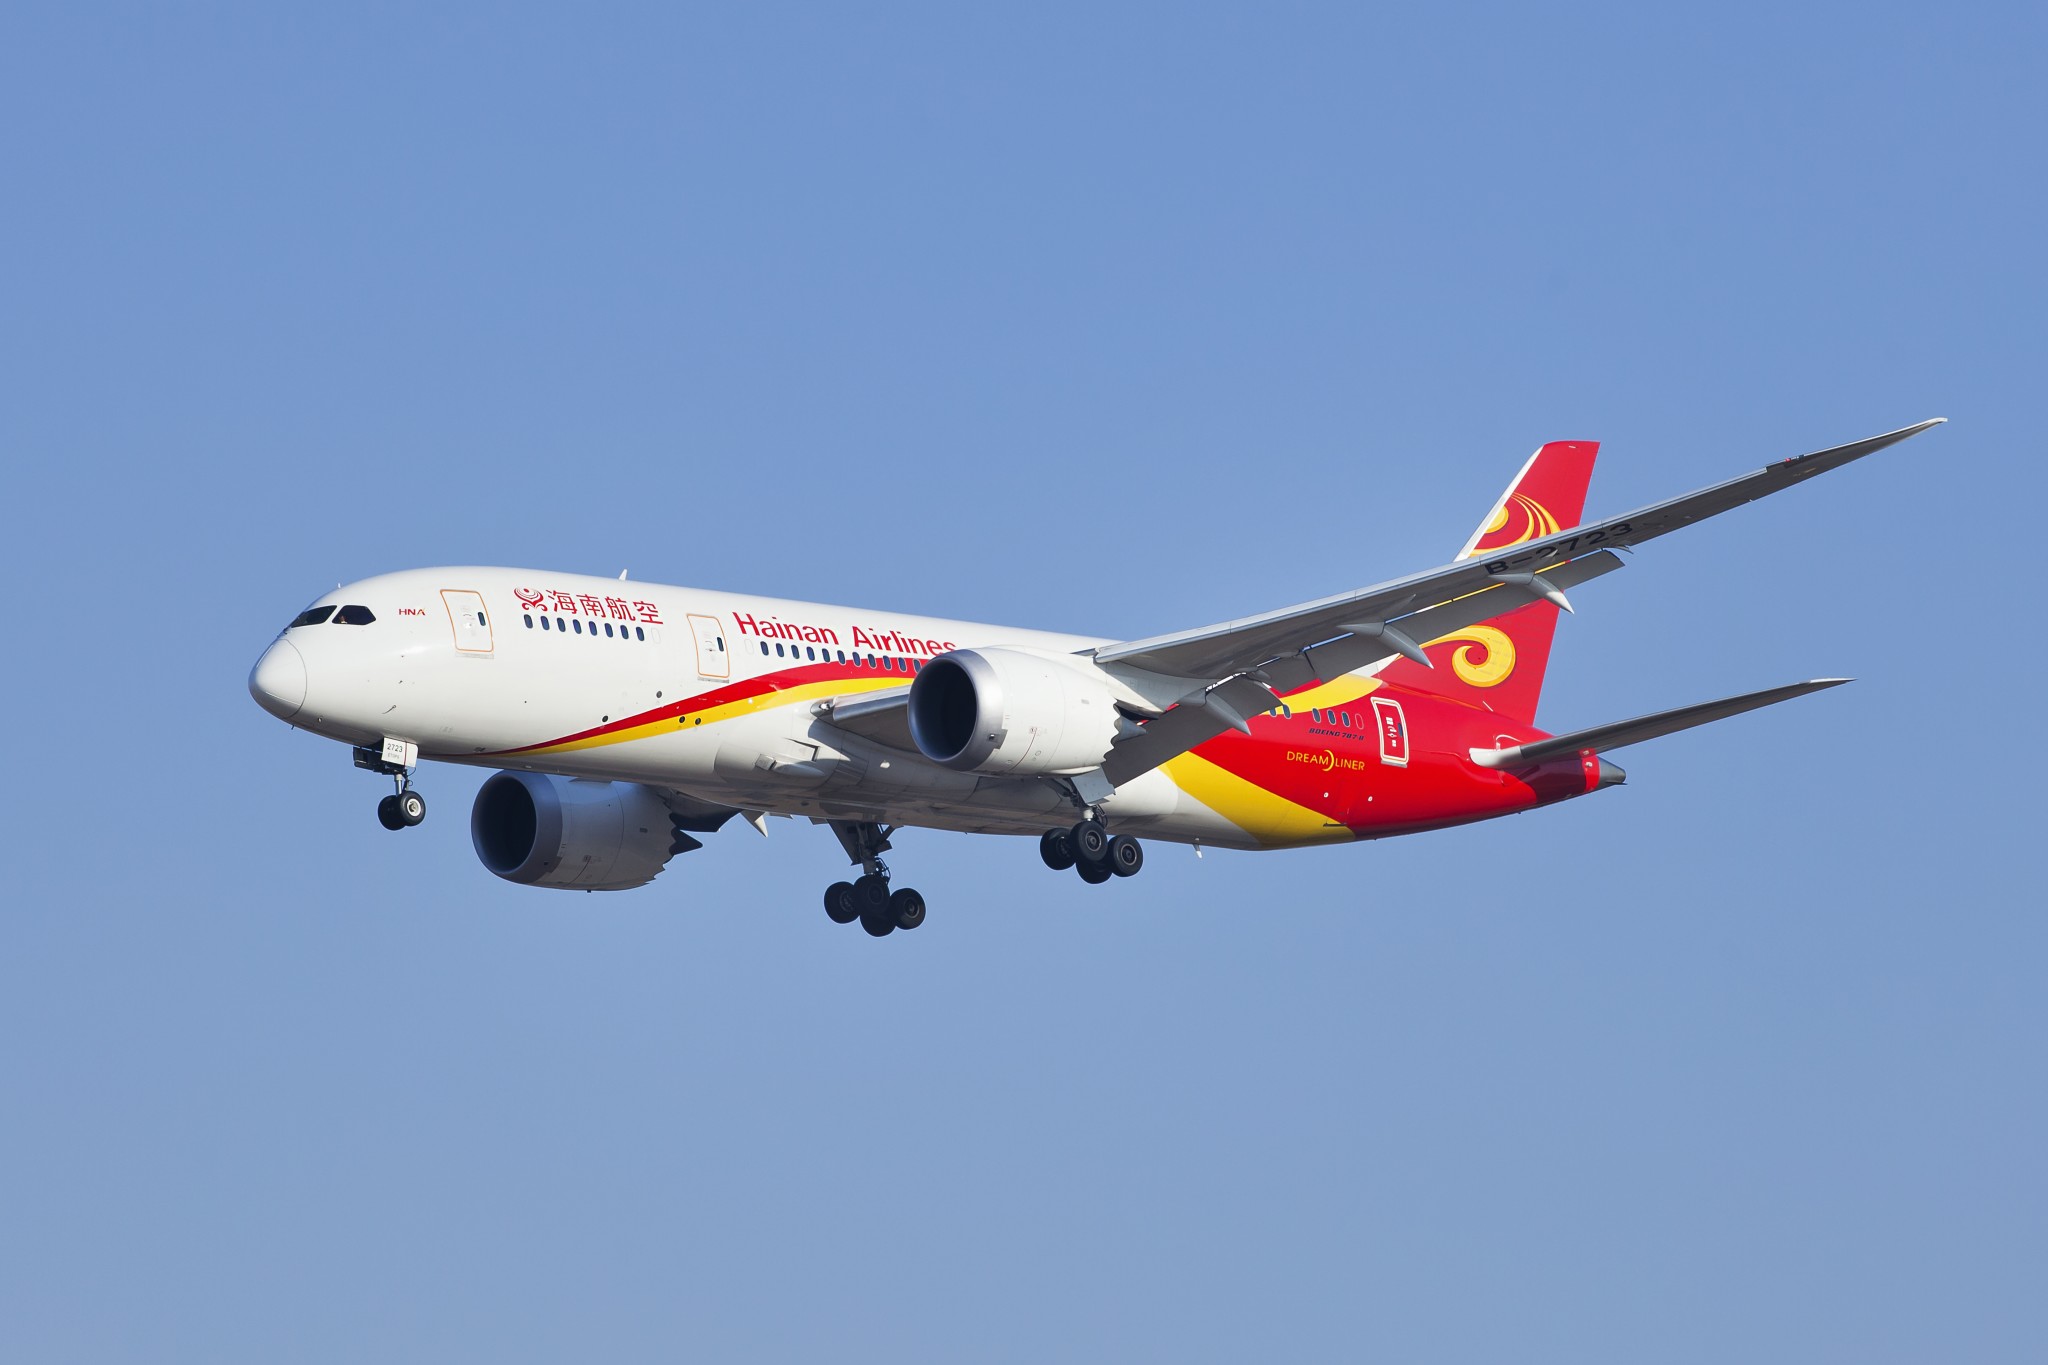 Hainan and Iberia launch codeshare agreement for China and Spain destinations